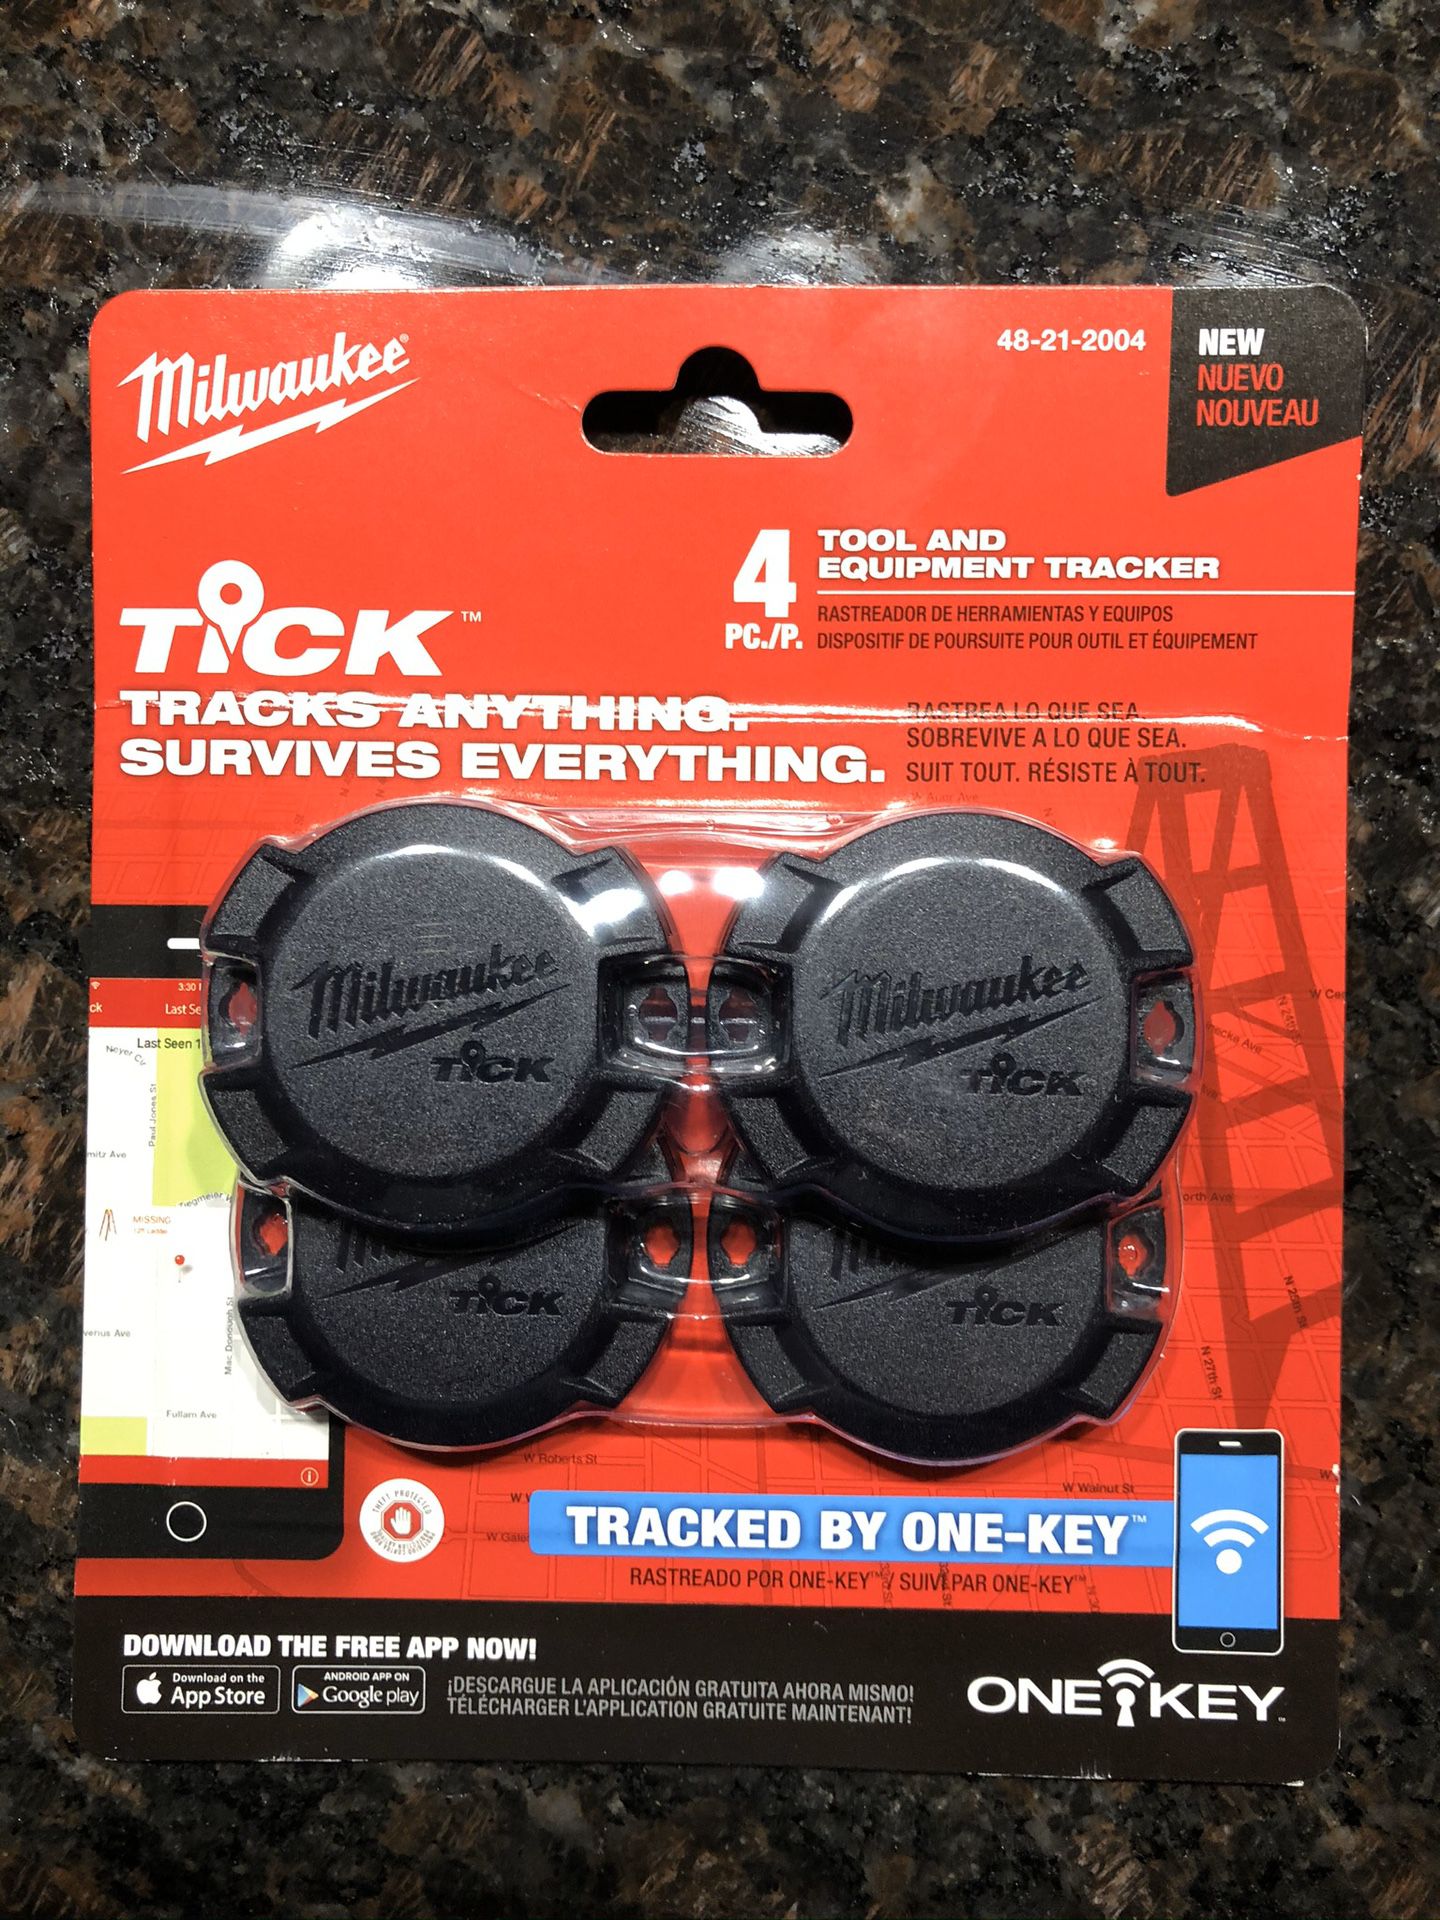 Brand new set of 4 Milwaukee ticks tracking system for packout boxes and saws ladders lawnmowers snowblowers etc..